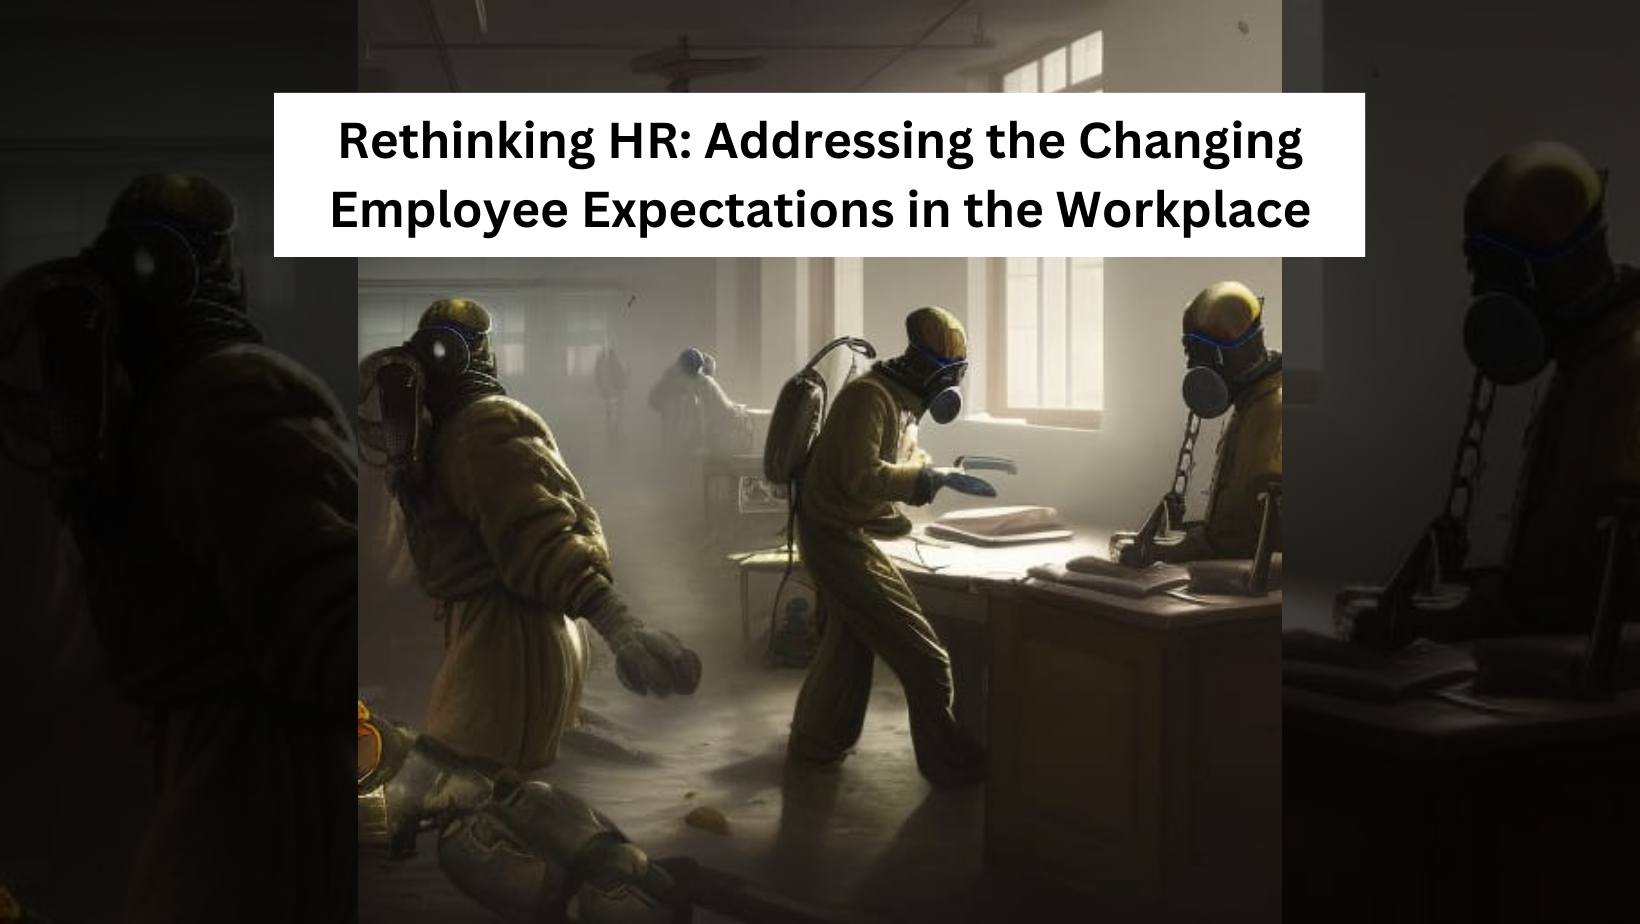 Rethinking HR: Addressing the Changing Employee Expectations in the Workplace